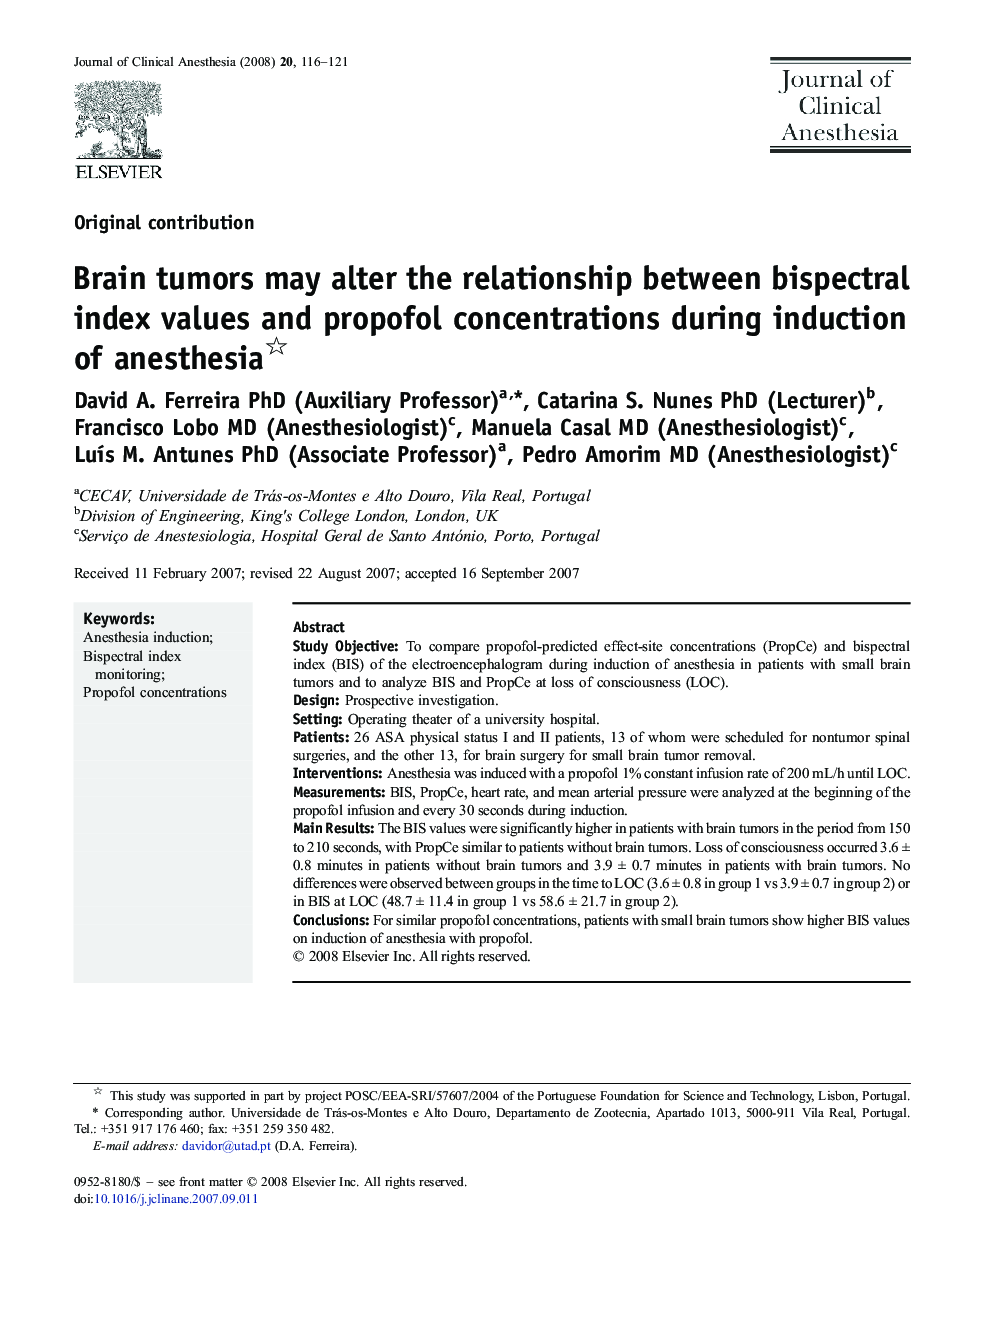 Brain tumors may alter the relationship between bispectral index values and propofol concentrations during induction of anesthesia 